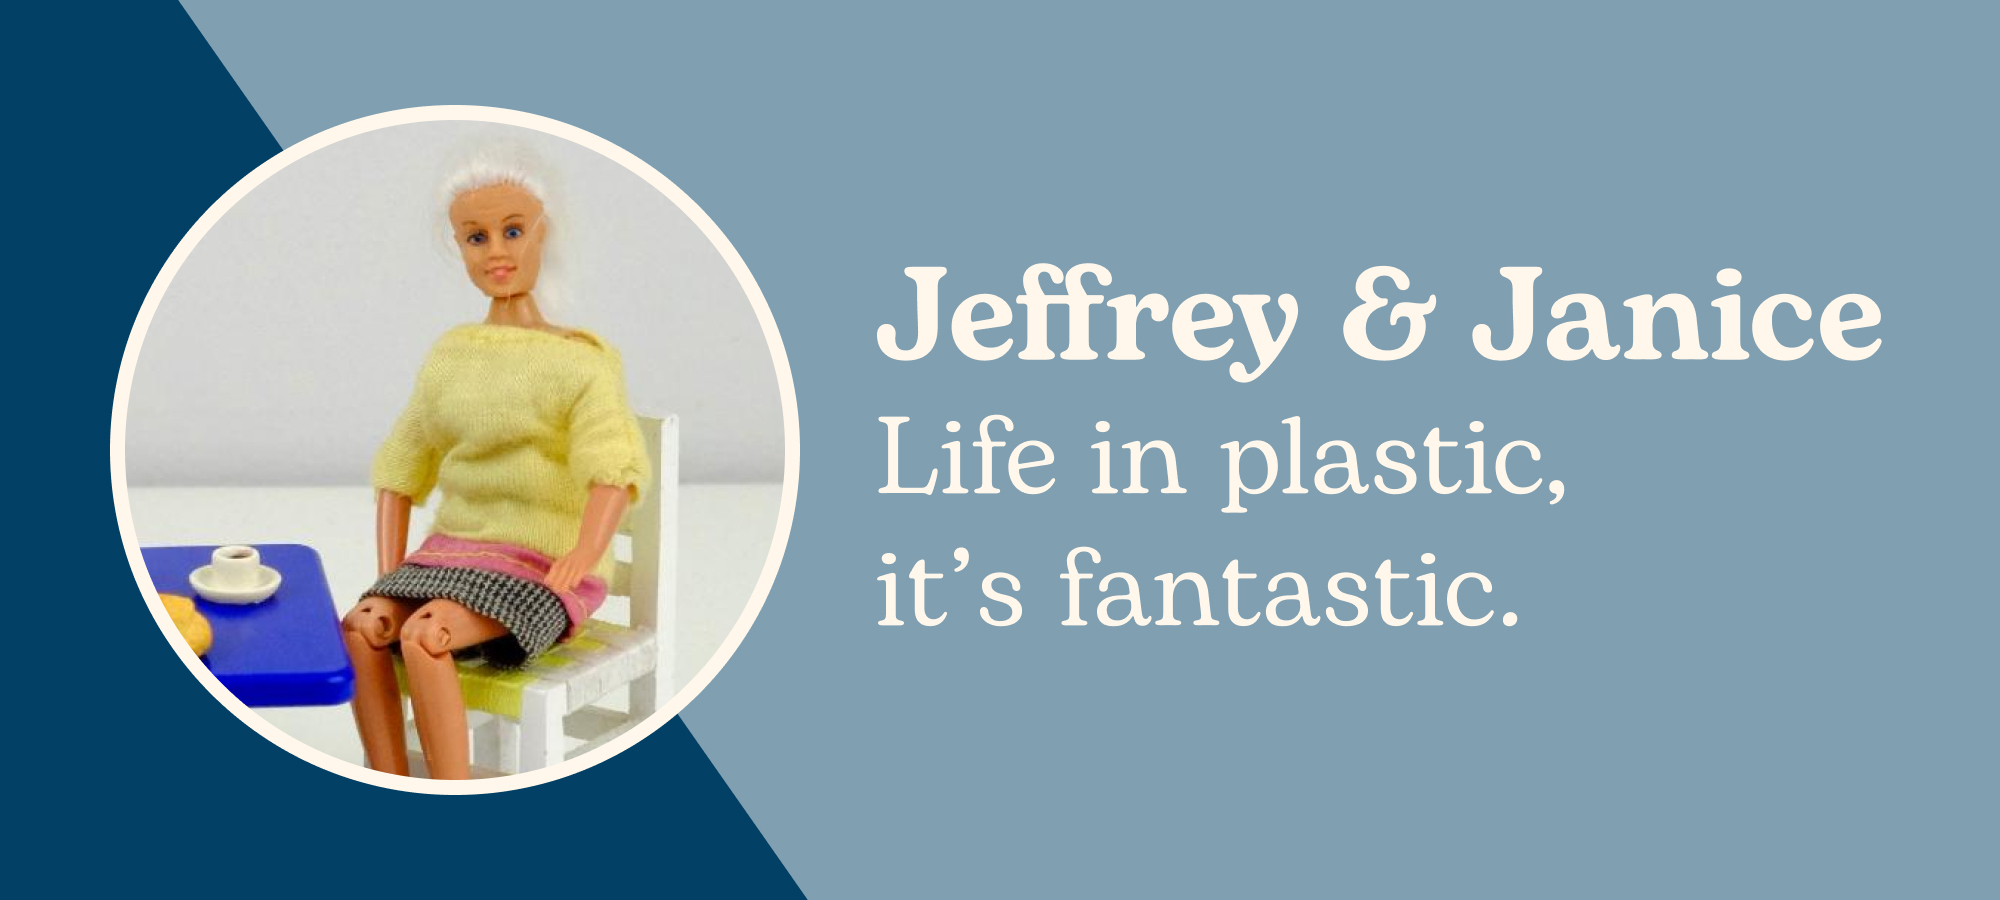 Jeffrey and Janice: Life in plastic, it's fantastic.